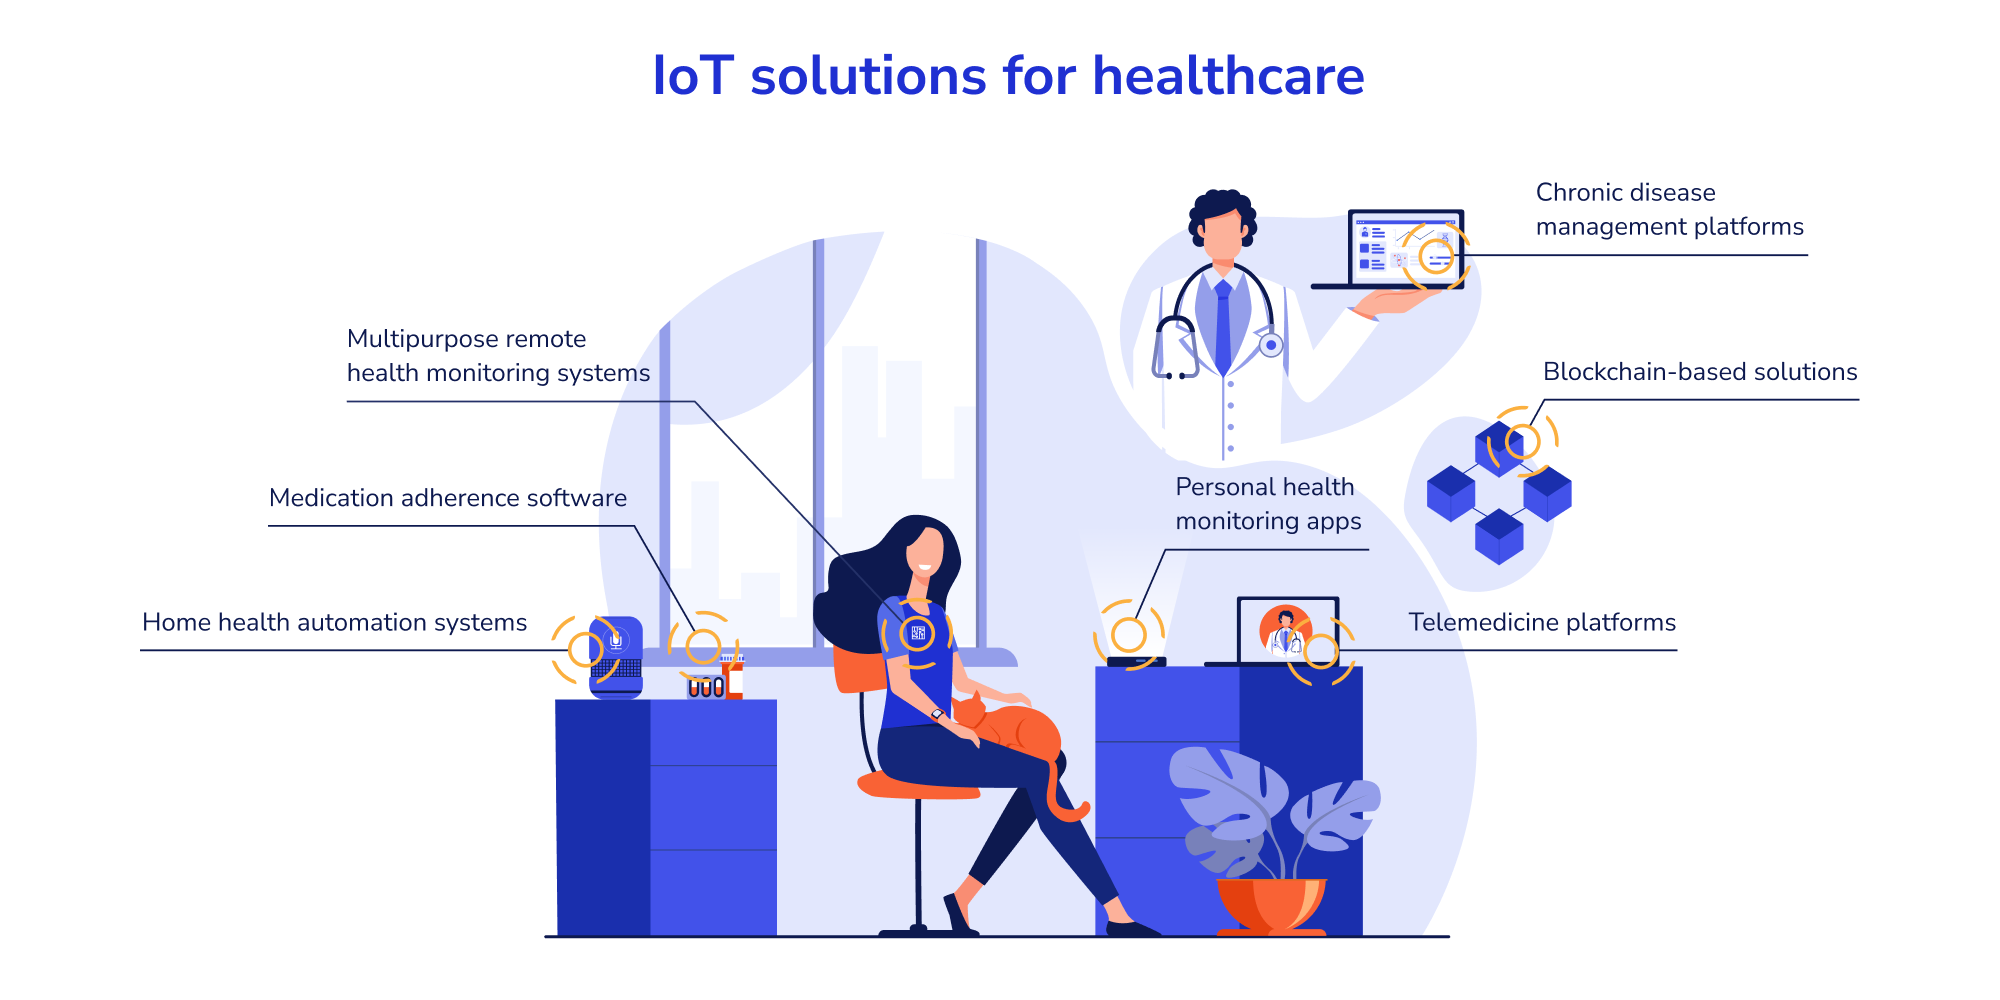 Â IoT solutions for healthcare